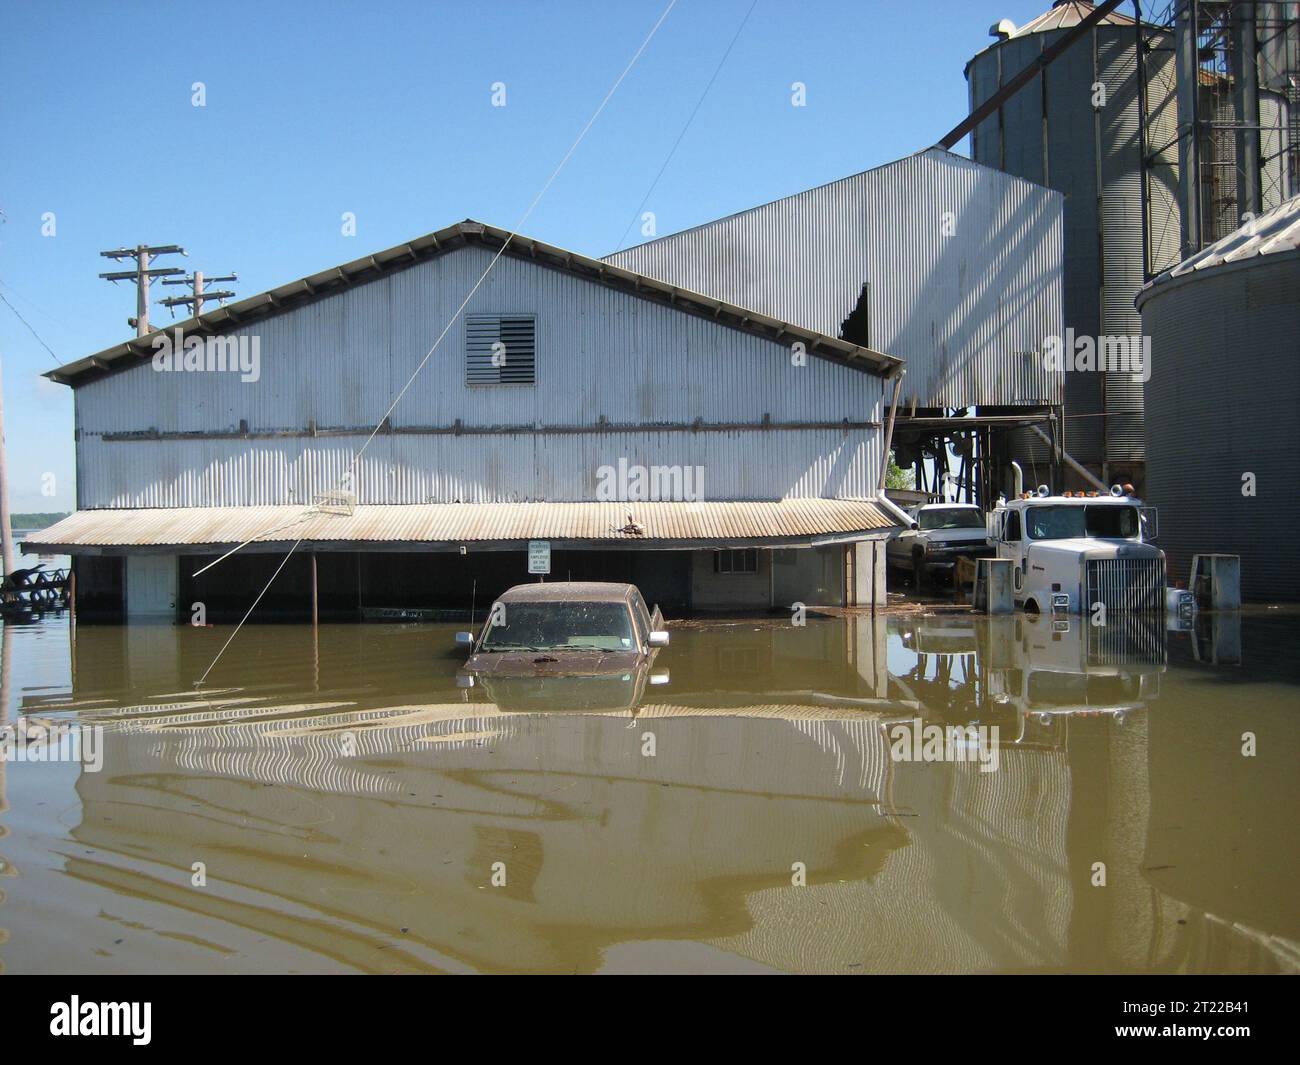 Waters Swamped Trucks and Other Farming Equipment at the Farming Co-Op on Bald Knob National Wildlife Refuge. Subjects: Floods; Natural disasters; Wildlife refuges; Roads; Vehicles; Buildings, facilities and structures. Location: Arkansas. Fish and Wildlife Service Site: BALD KNOB NATIONAL WILDLIFE REFUGE. Stock Photo